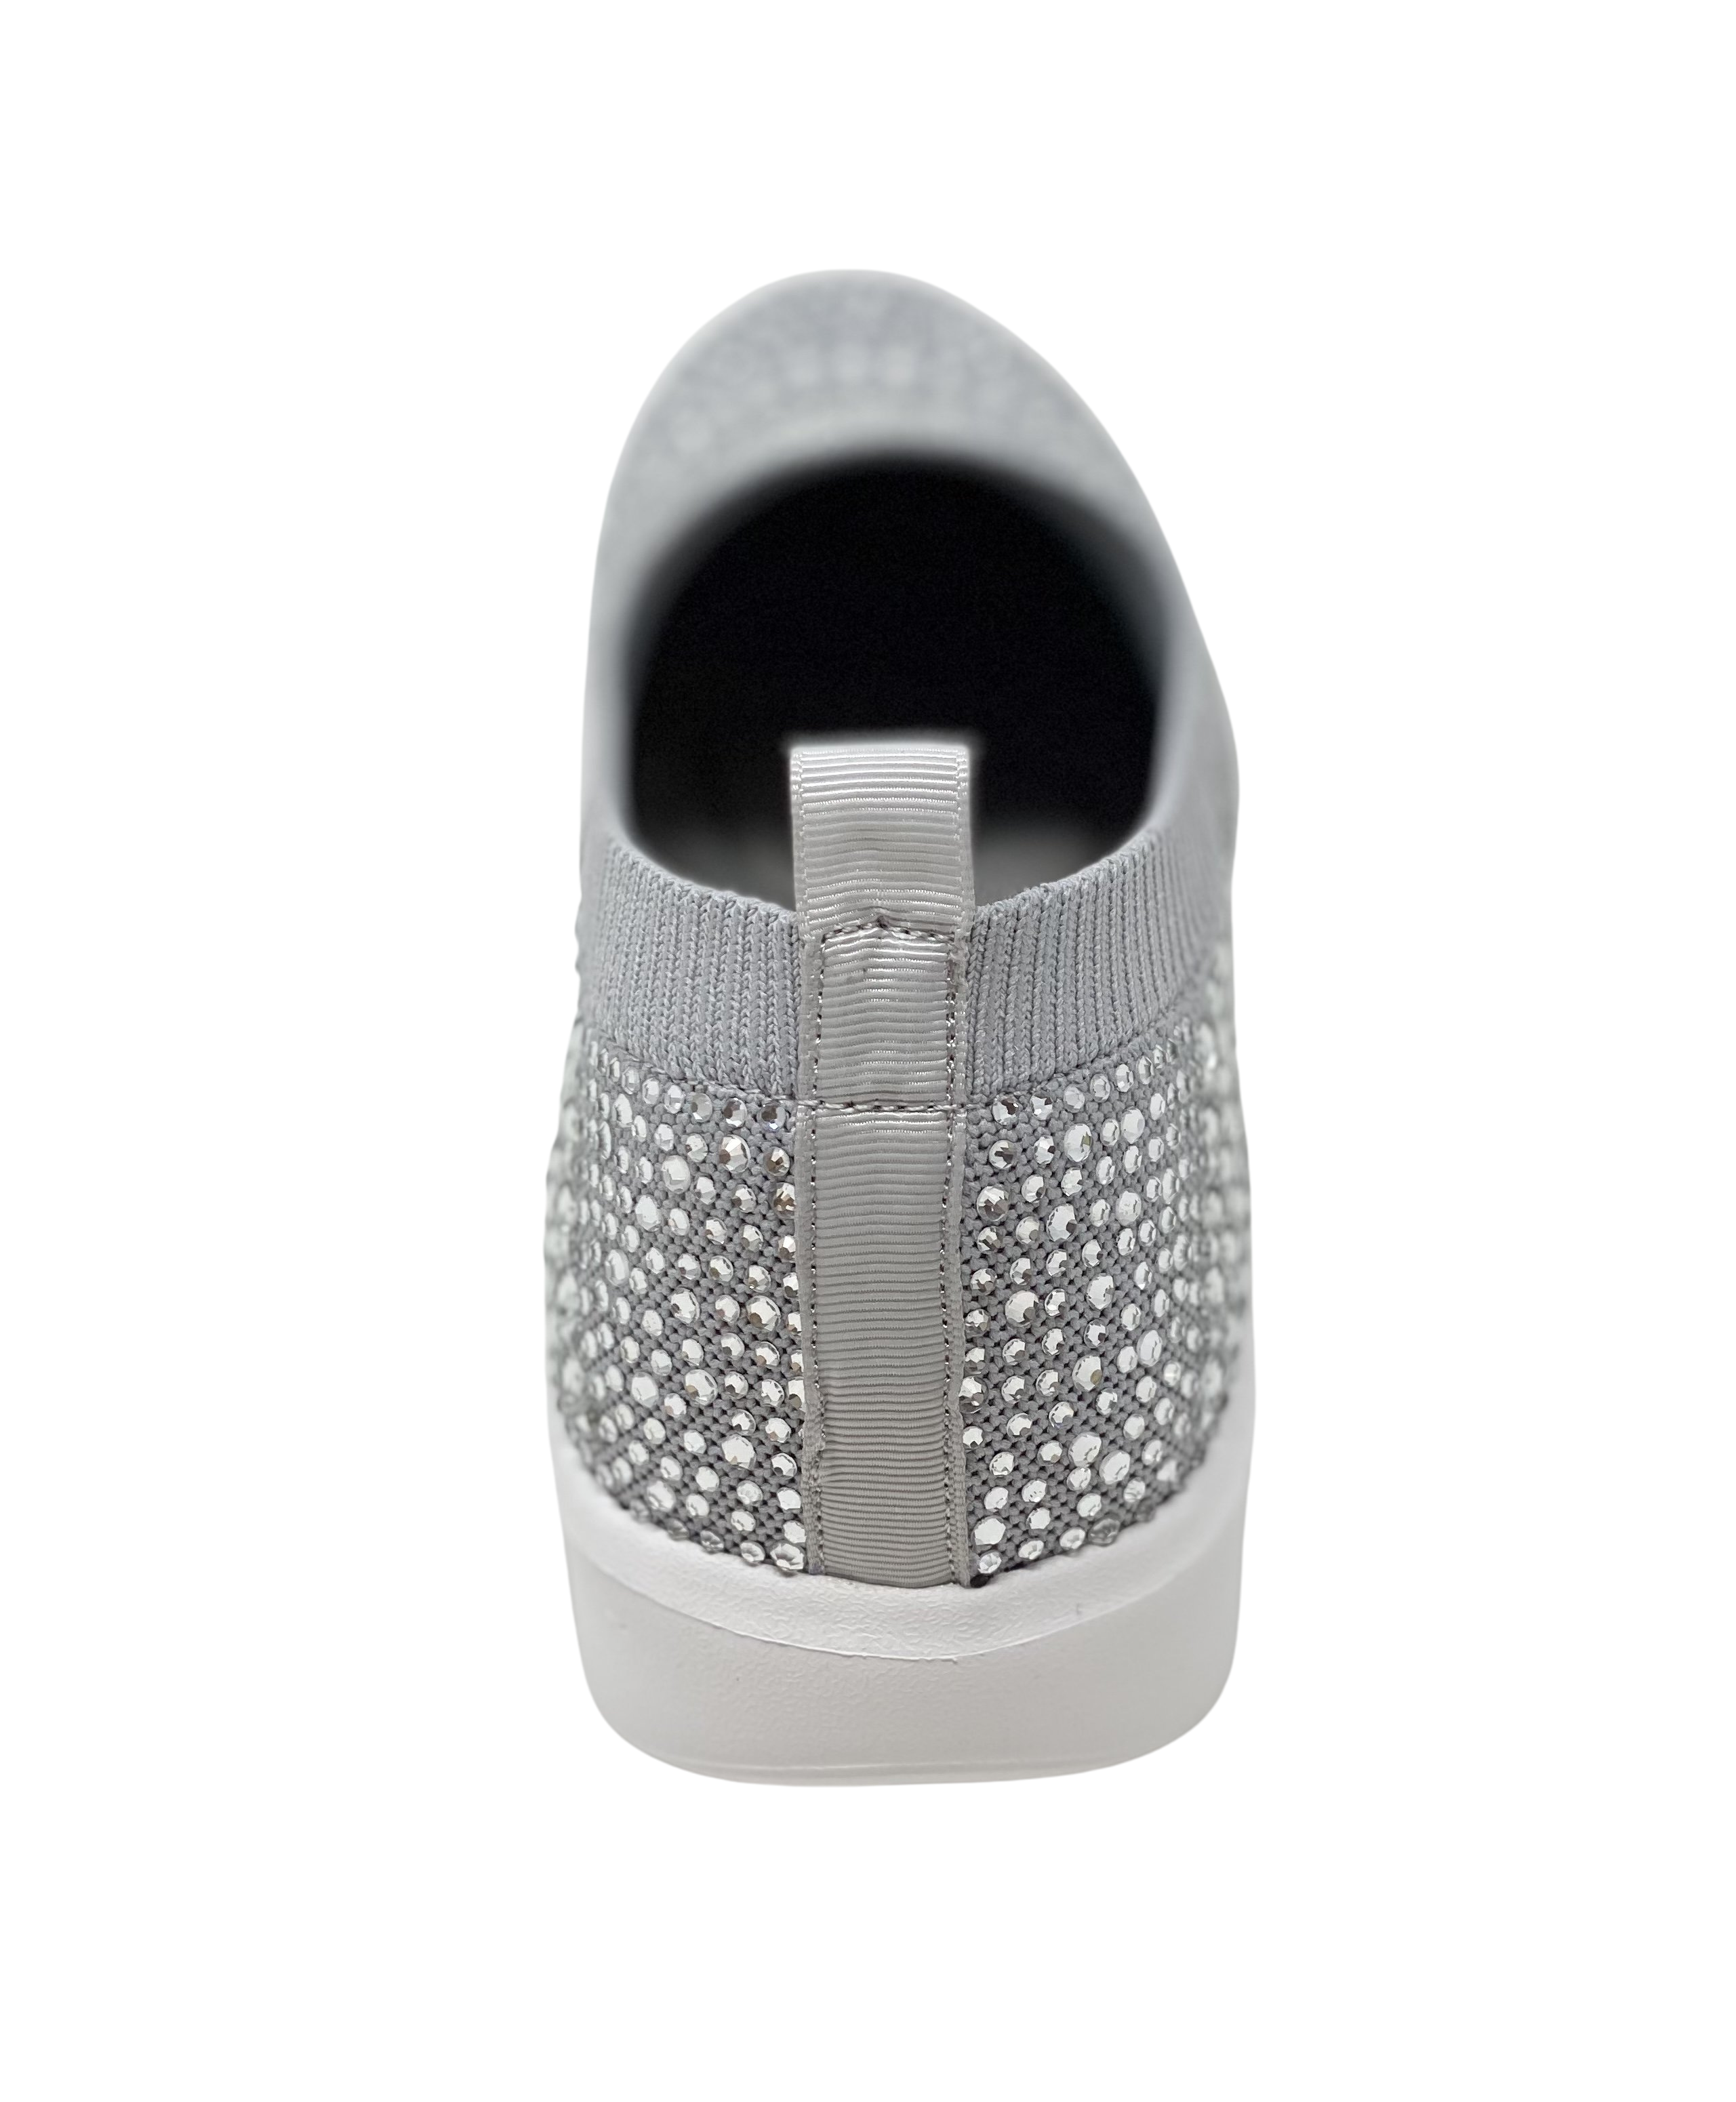 CARRY SNEAKER WITH SPARKLY RHINESTONE